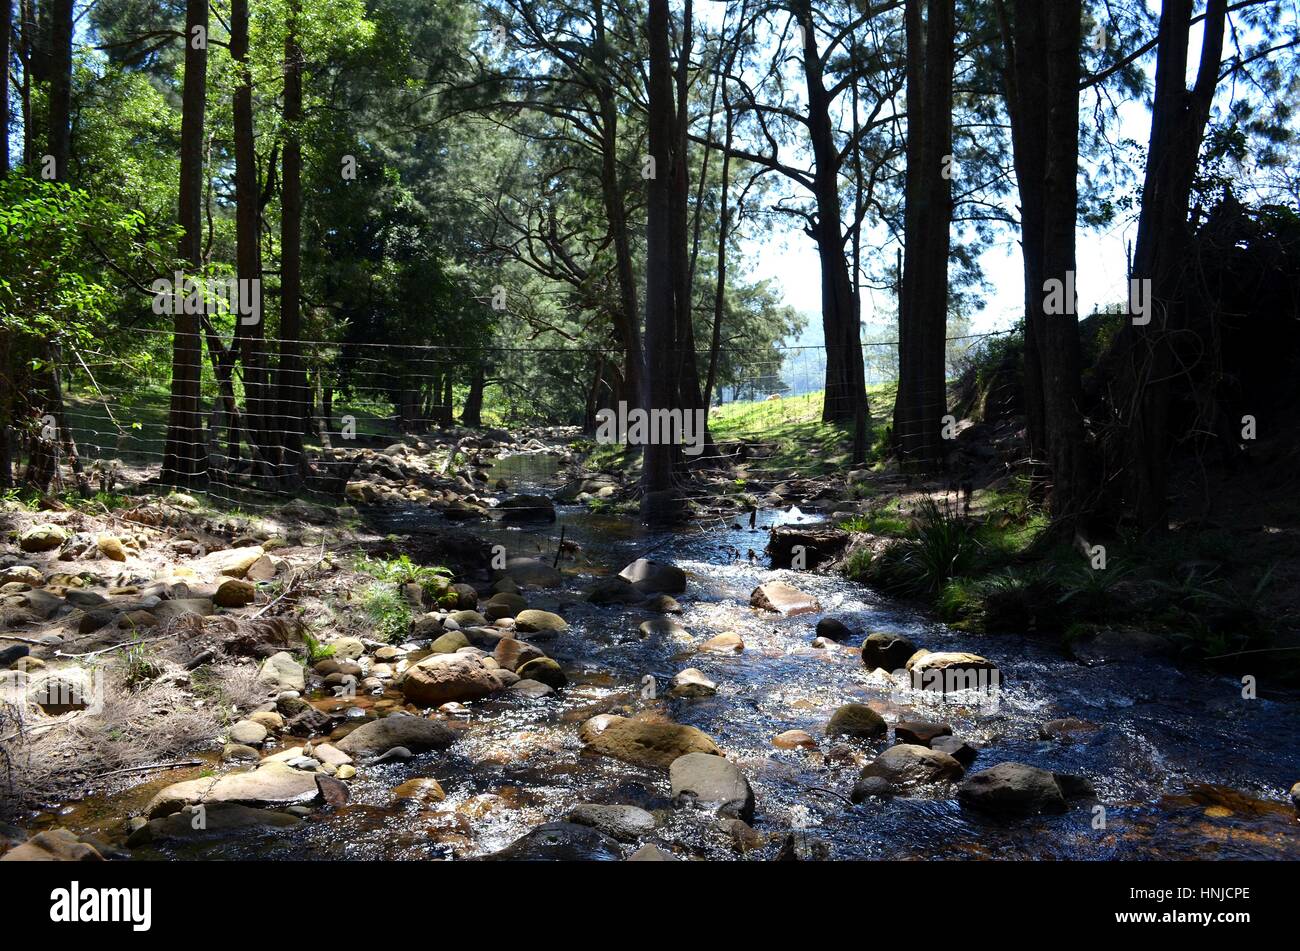 Wire fence looking very out of place in glorious river setting Australia Stock Photo